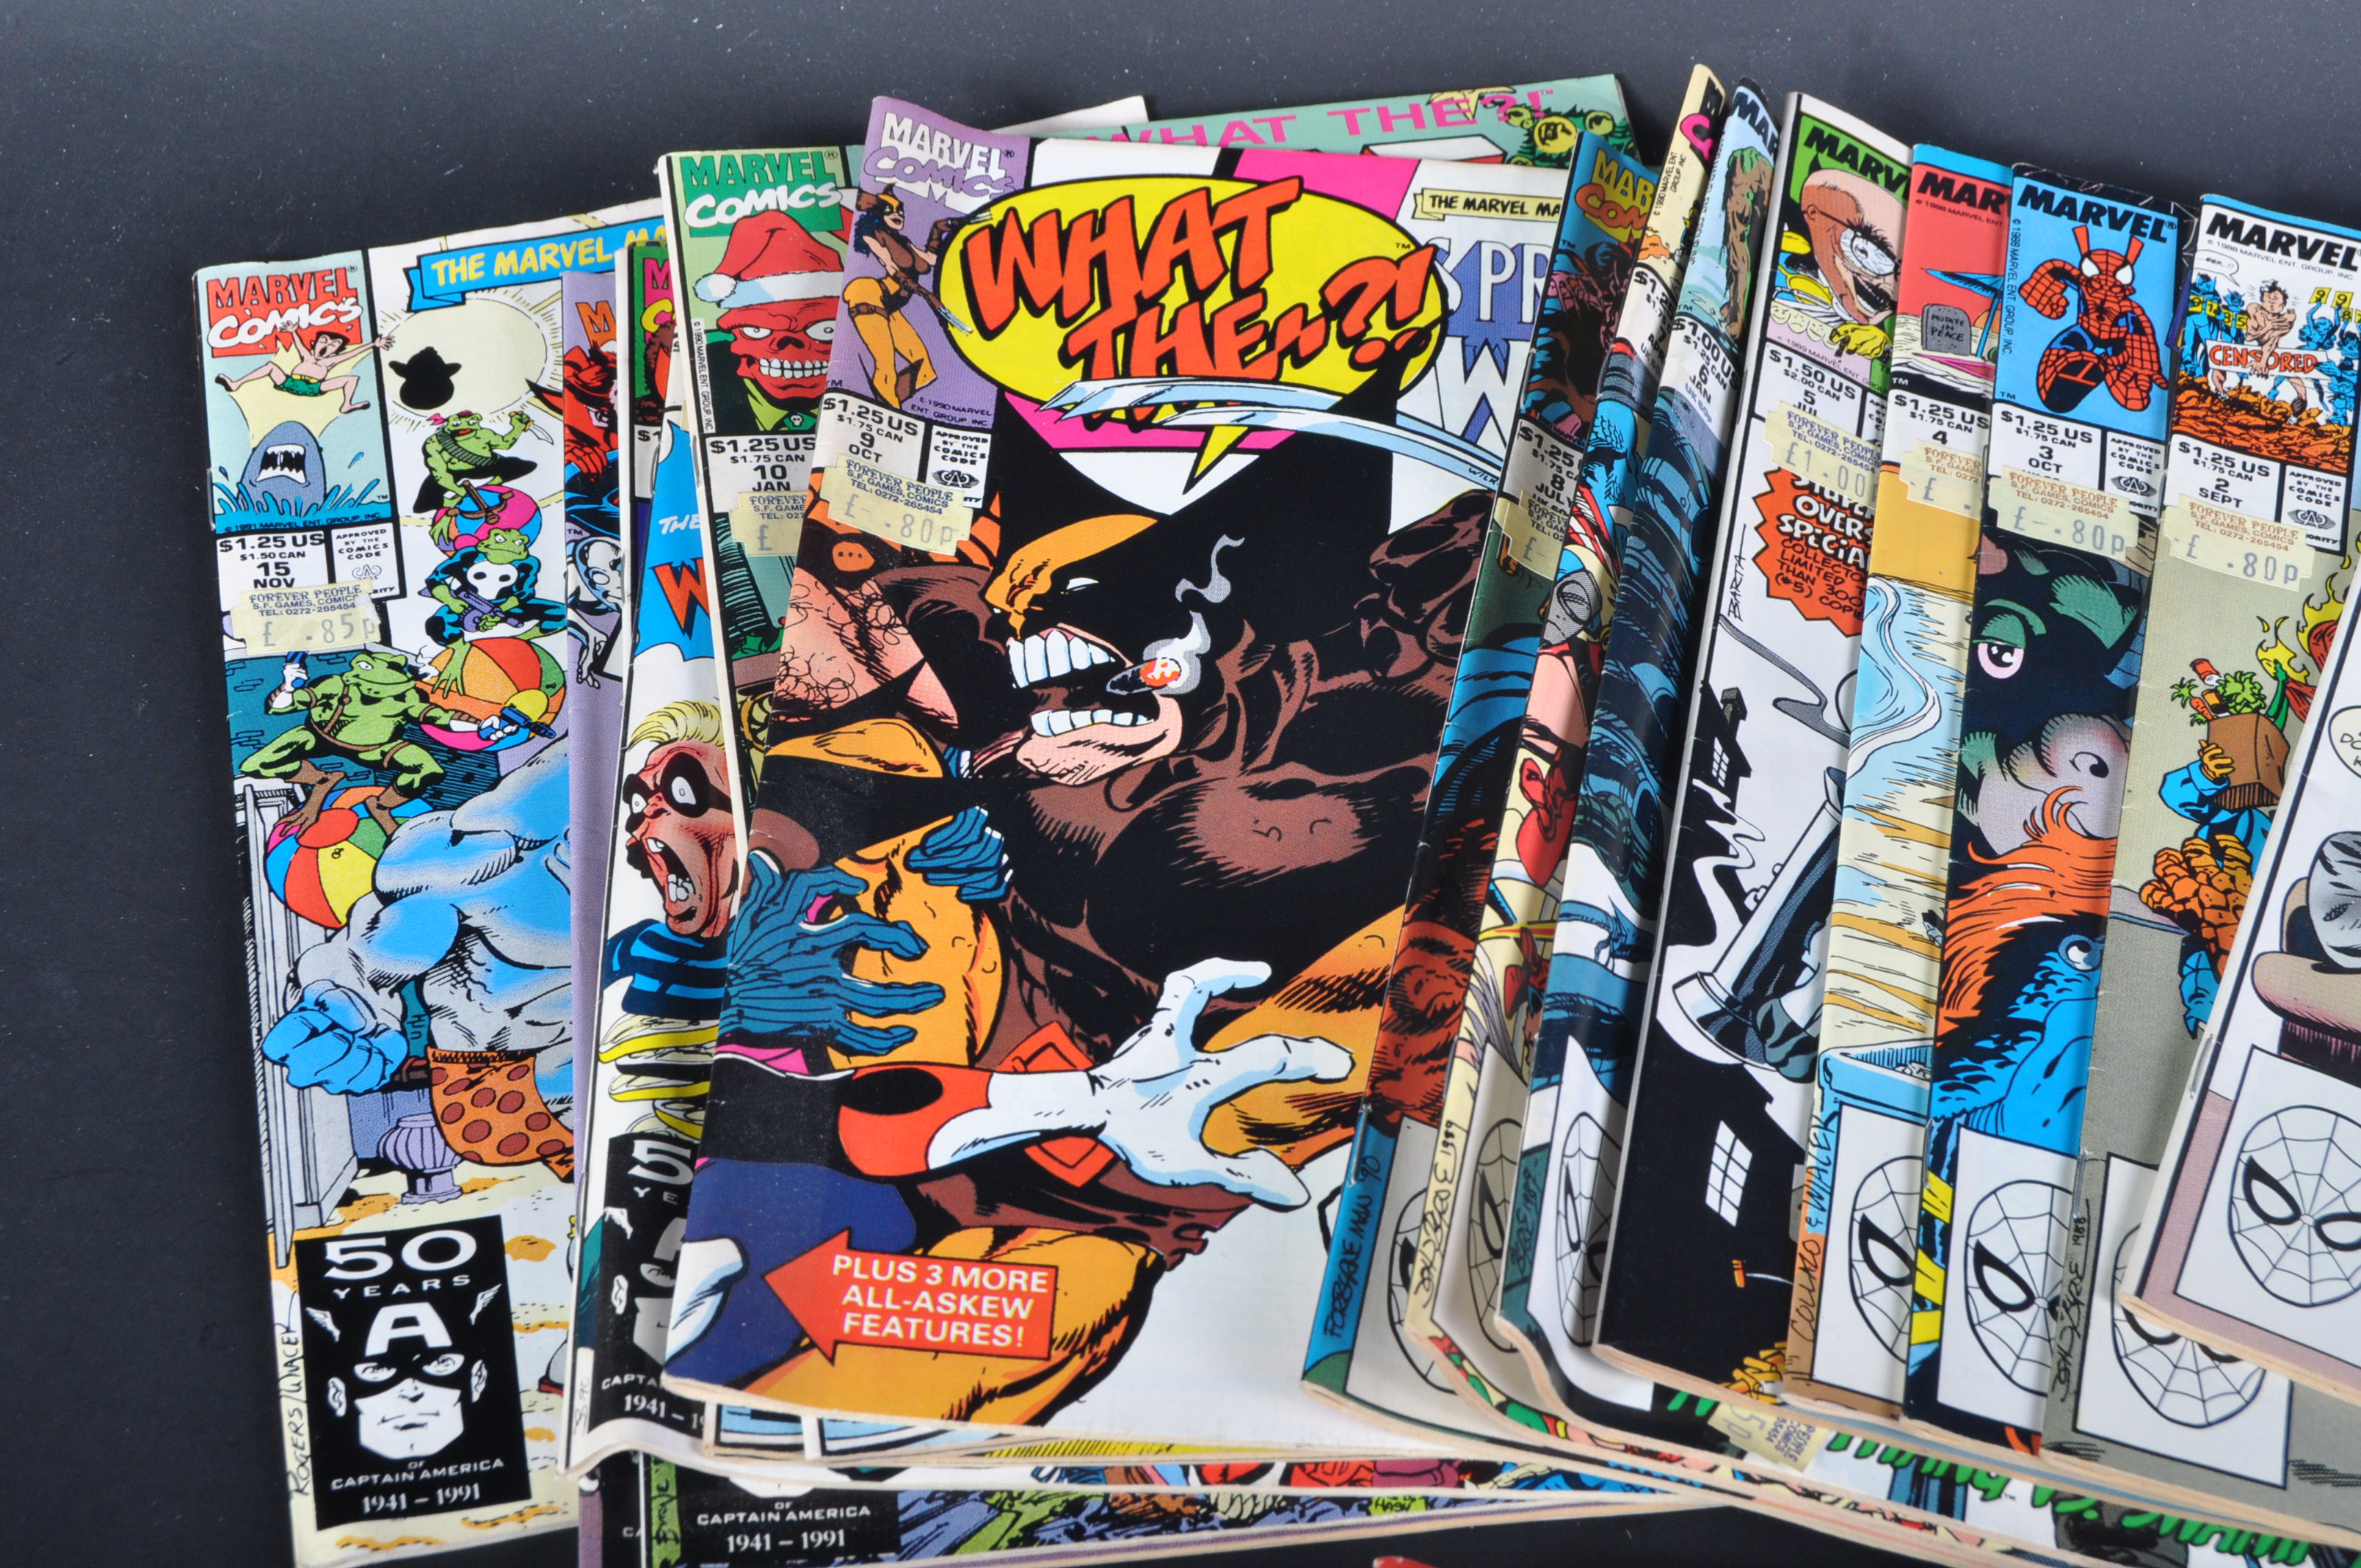 MARVEL COMICS - WHAT THE ..?! - COMPLETE RUN OF COMIC BOOKS - Image 4 of 6